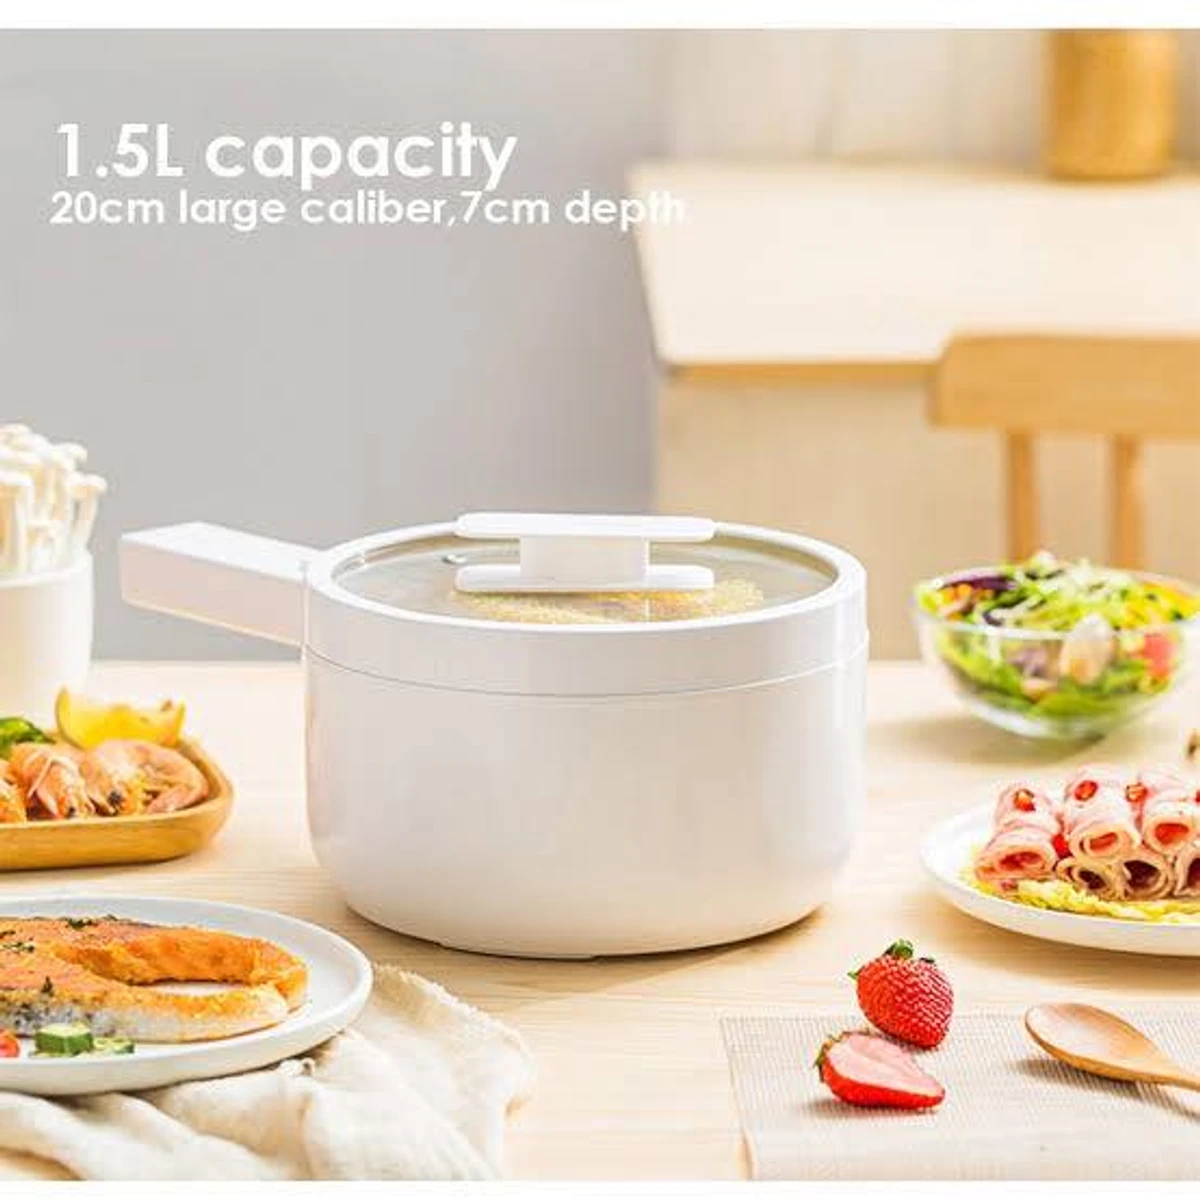 OLAYKS electric hot pot cooker with steamer